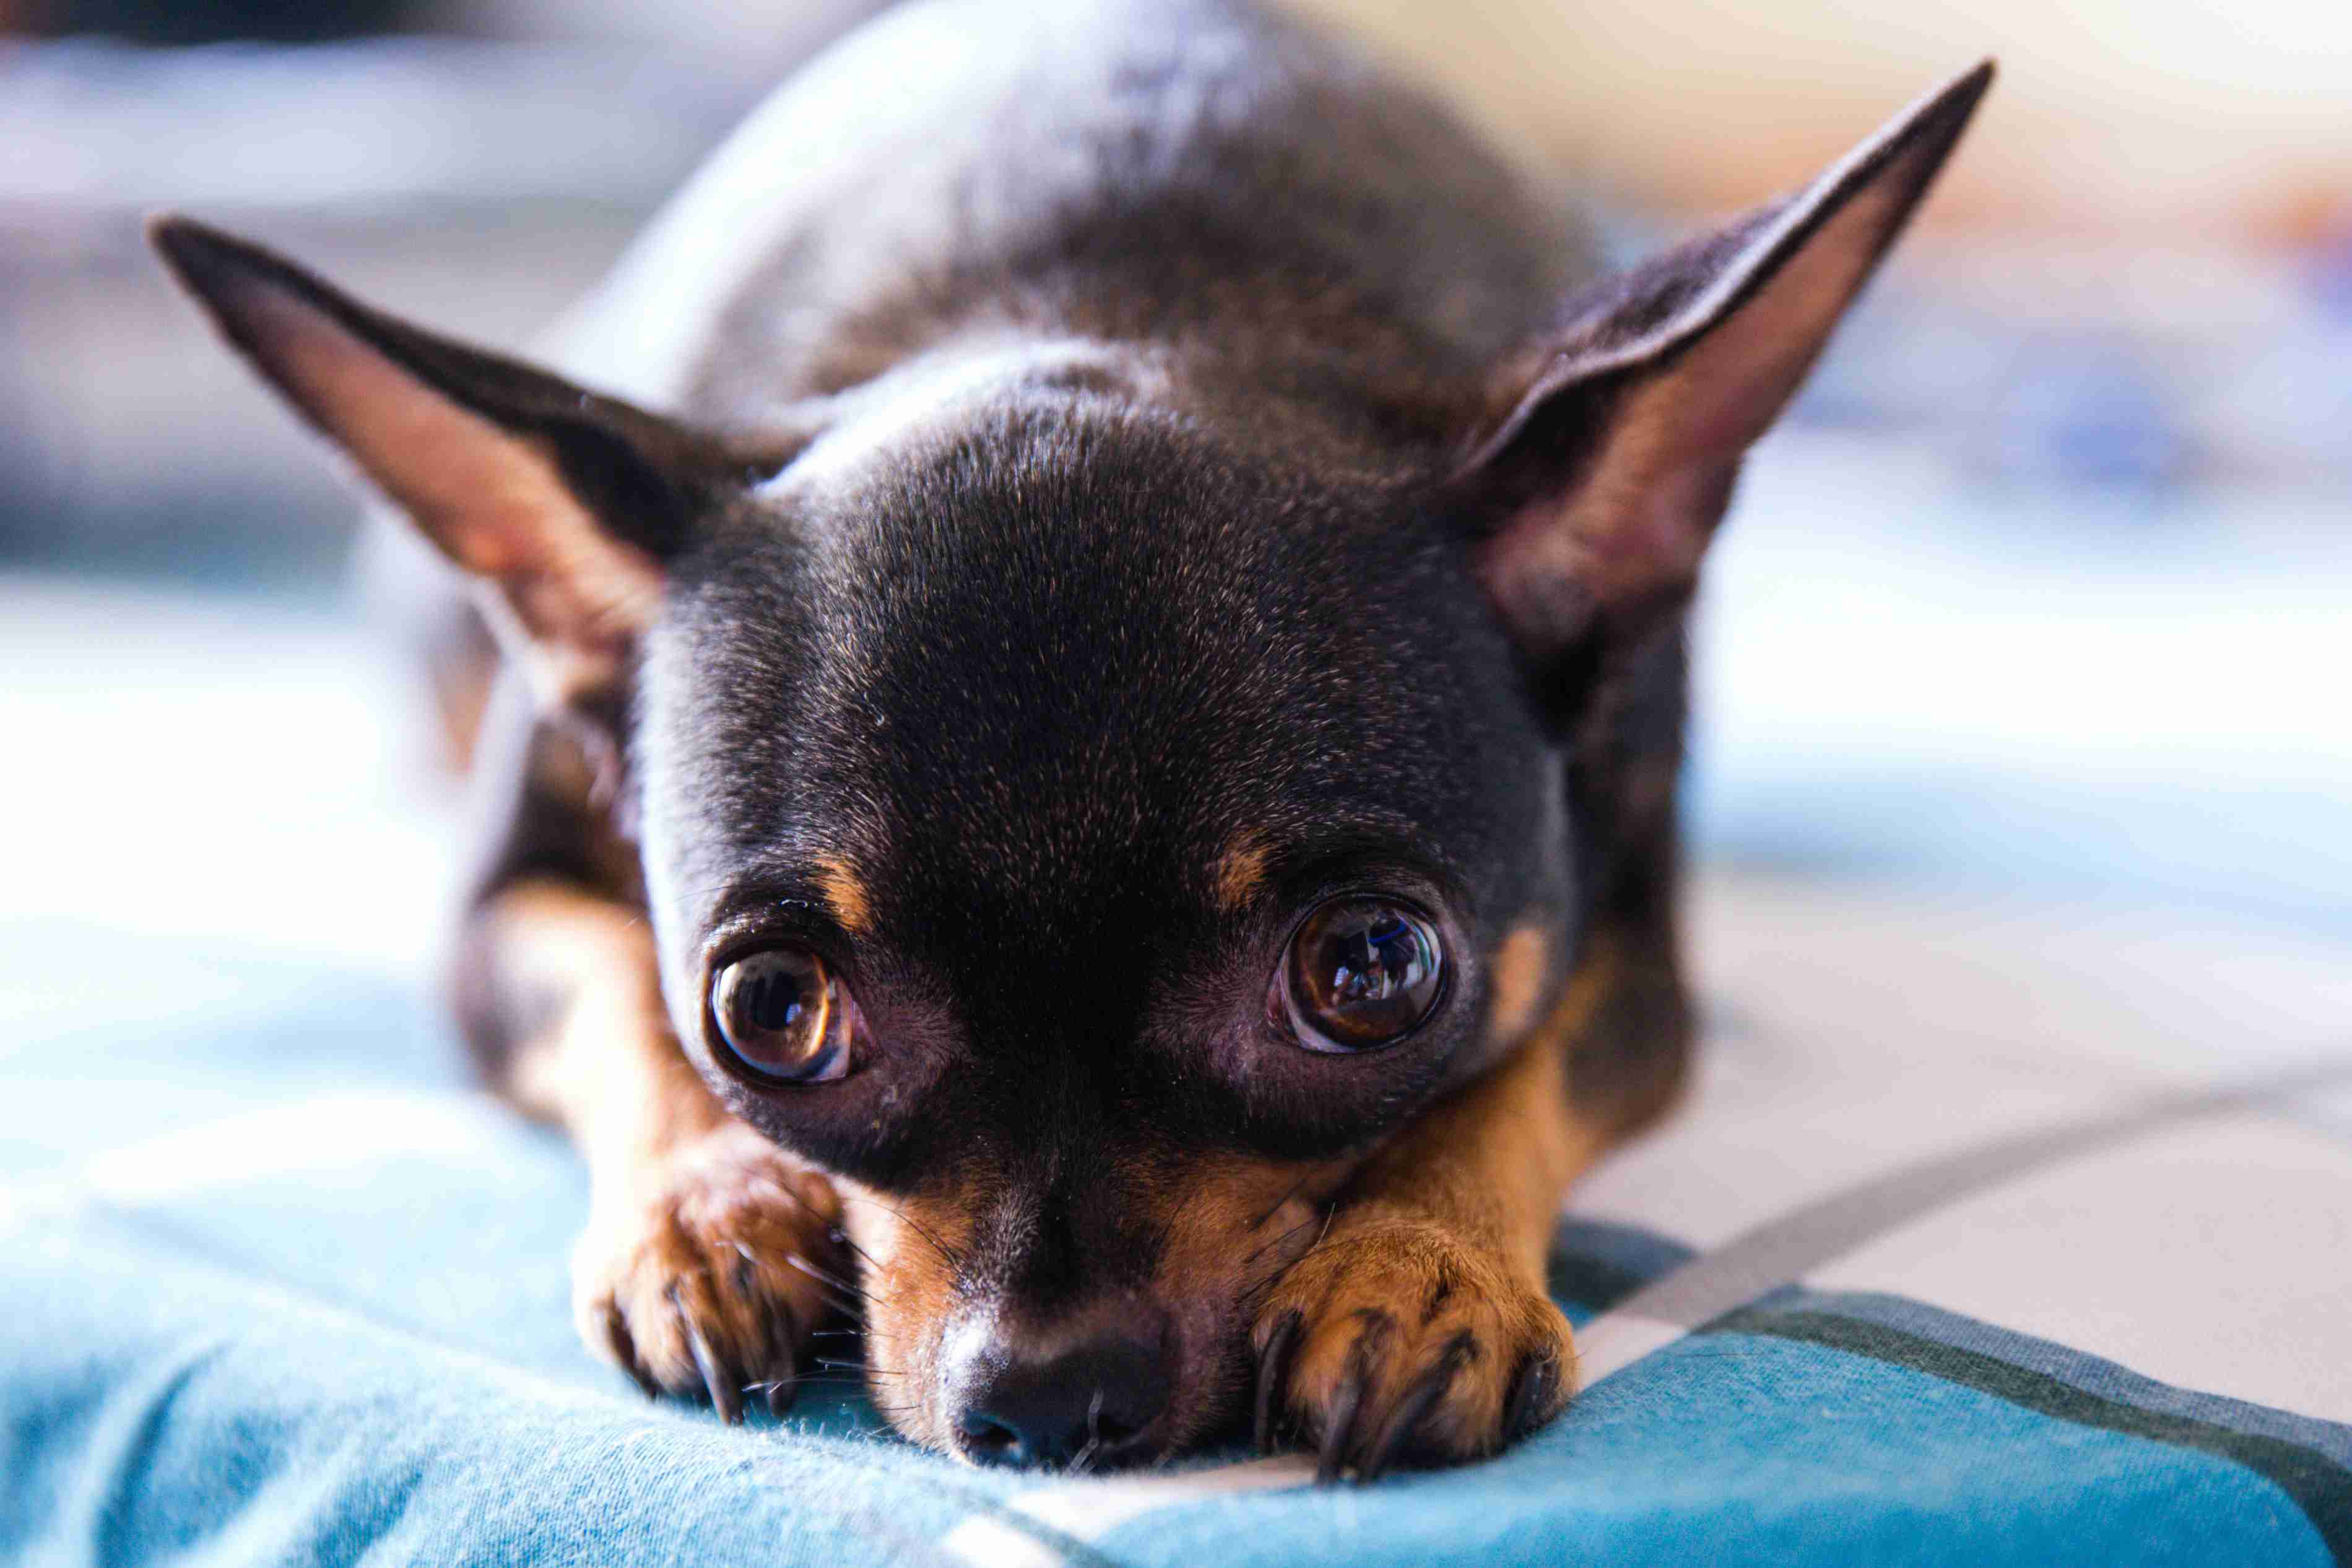 What are some common triggers for Chihuahua's anger issues?